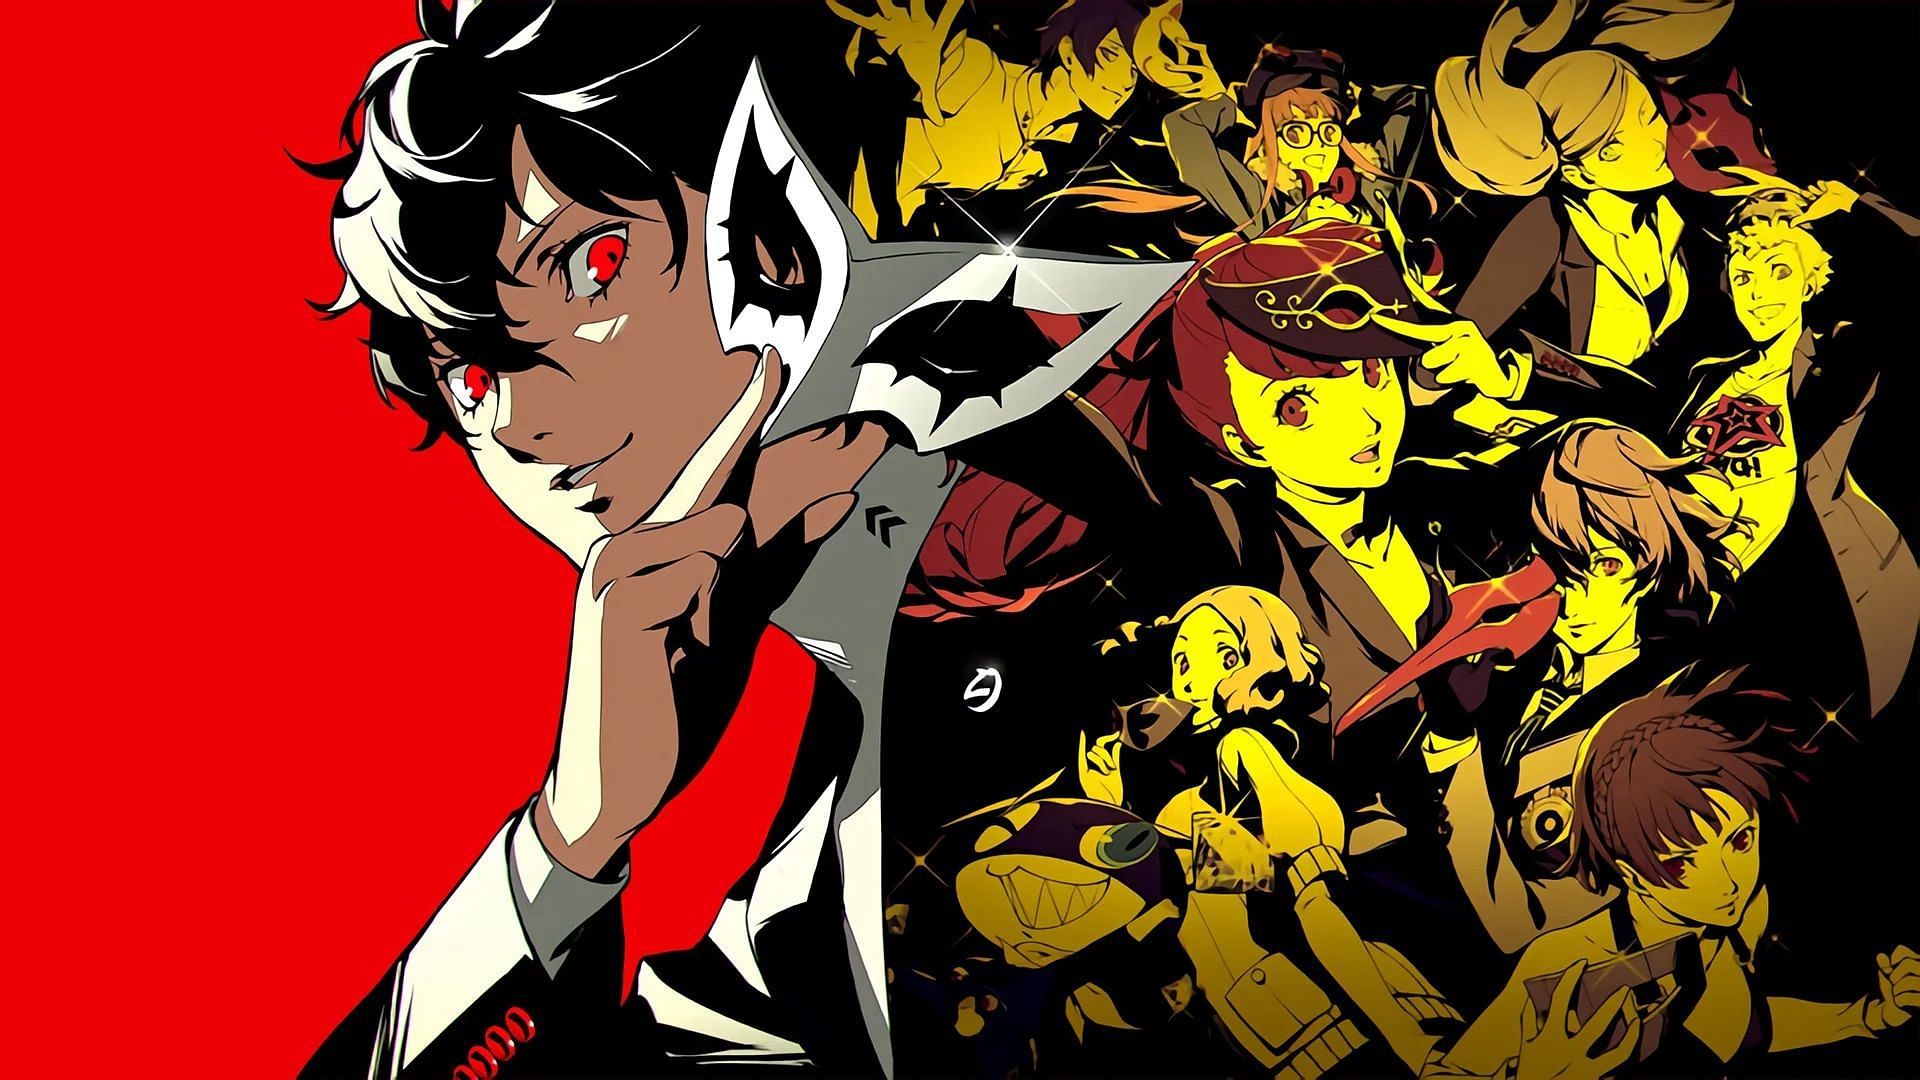 Persona 5 The Animation: 10 Differences Between The Anime & Video Game